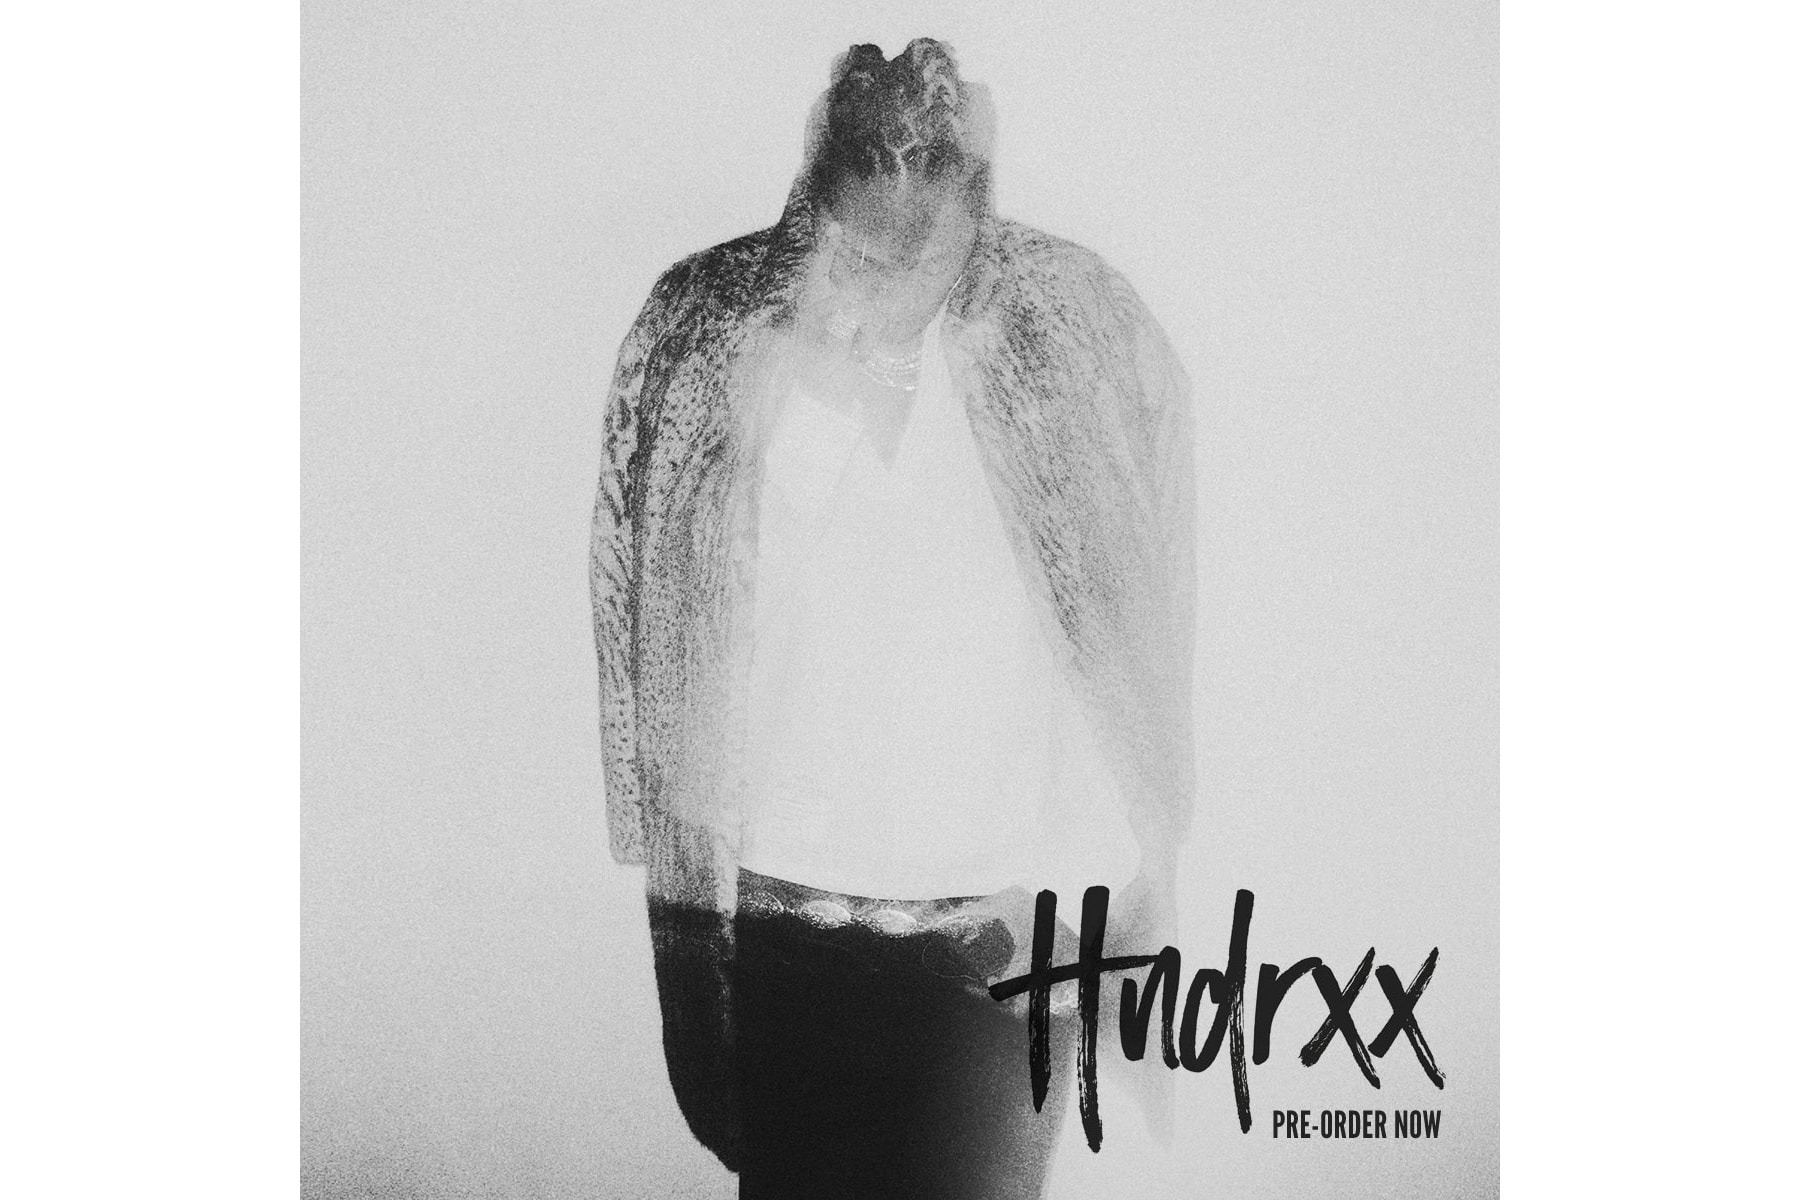 DJ Esco Is Premiering Future's 'HNDRXX' on Apple Music Right Now